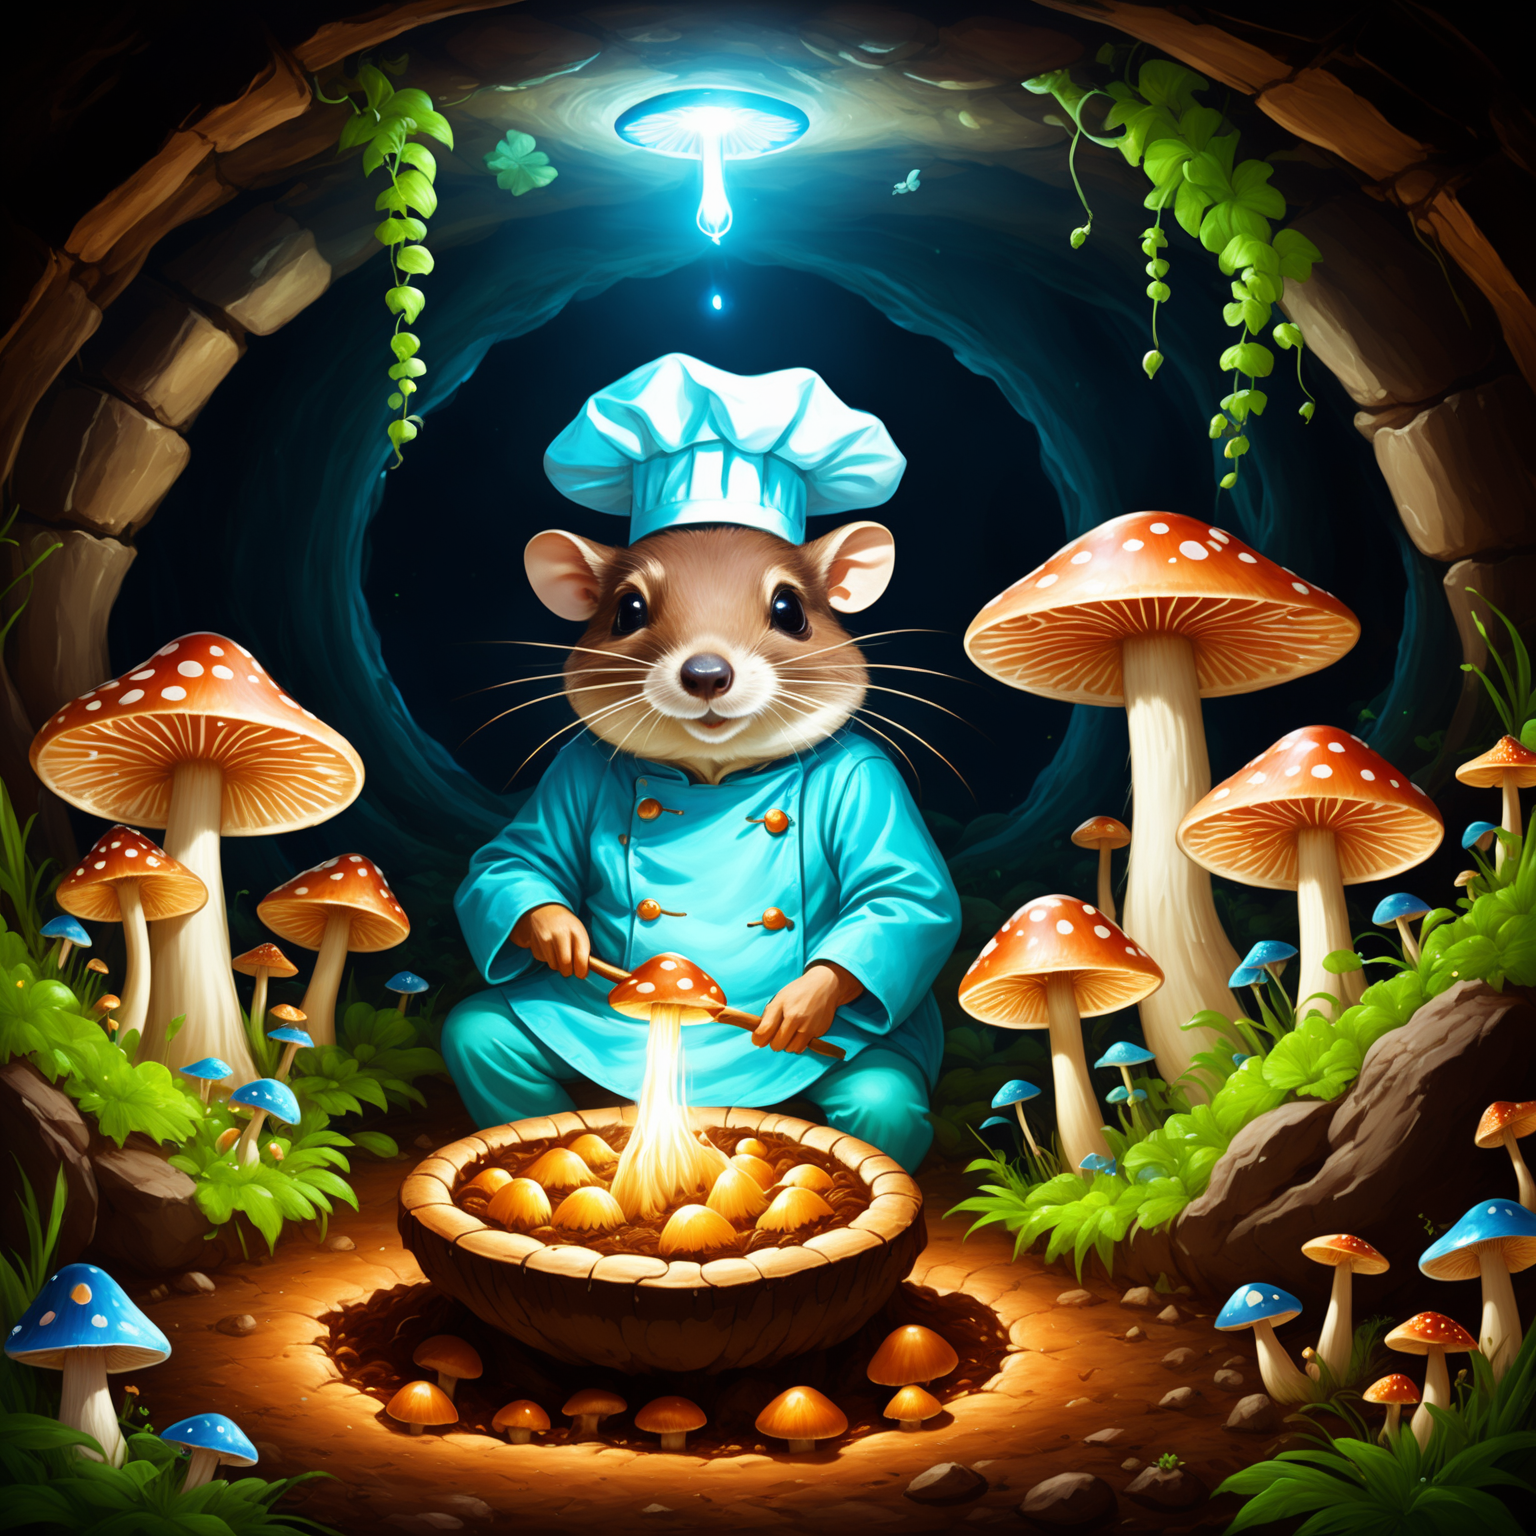 10. A cheerful mole chef gathering glowing mushrooms in a fairy ring circle deep in an underground cavern. Painterly illus...